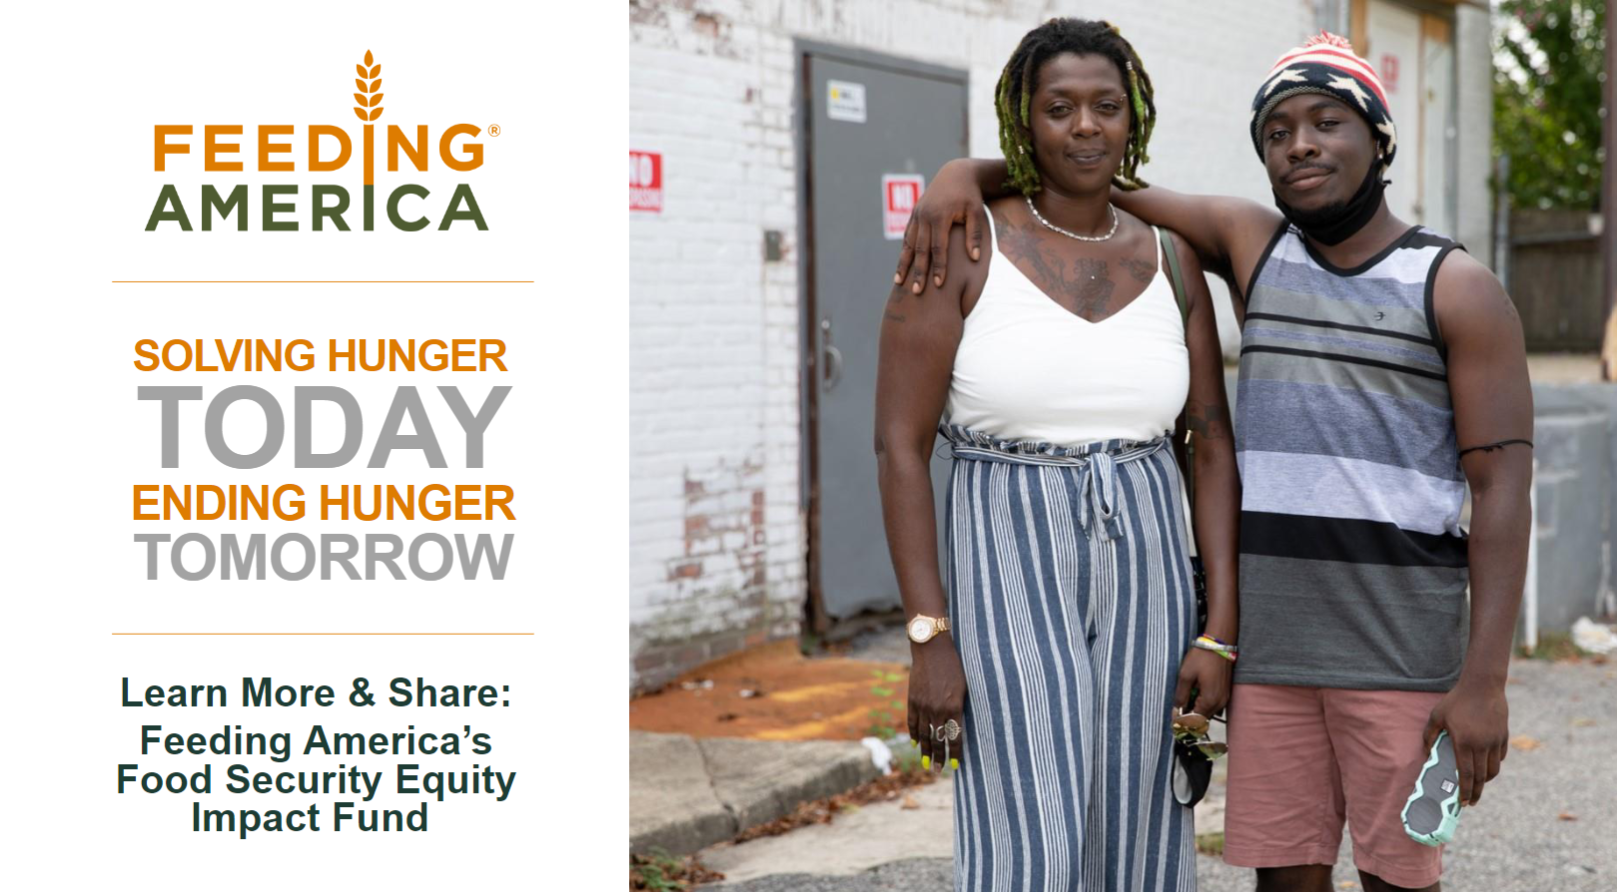 Part 2: Learn About Feeding America's Food Security Equity Impact Fund